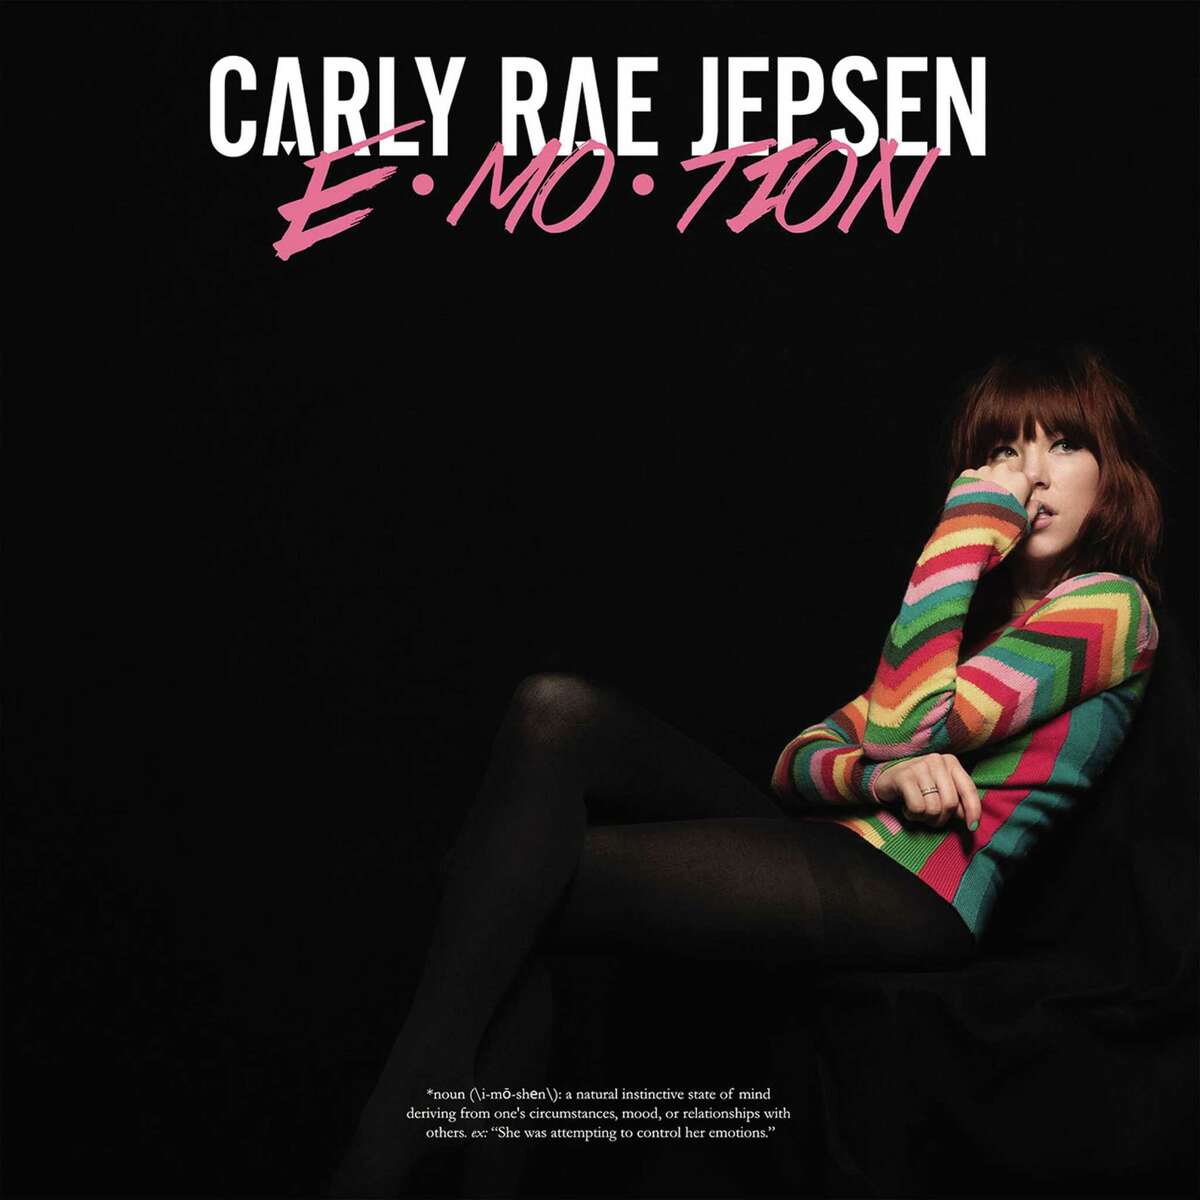 E•MO•Tion  by Carly Rae Jepsen should make her a pop superstar.